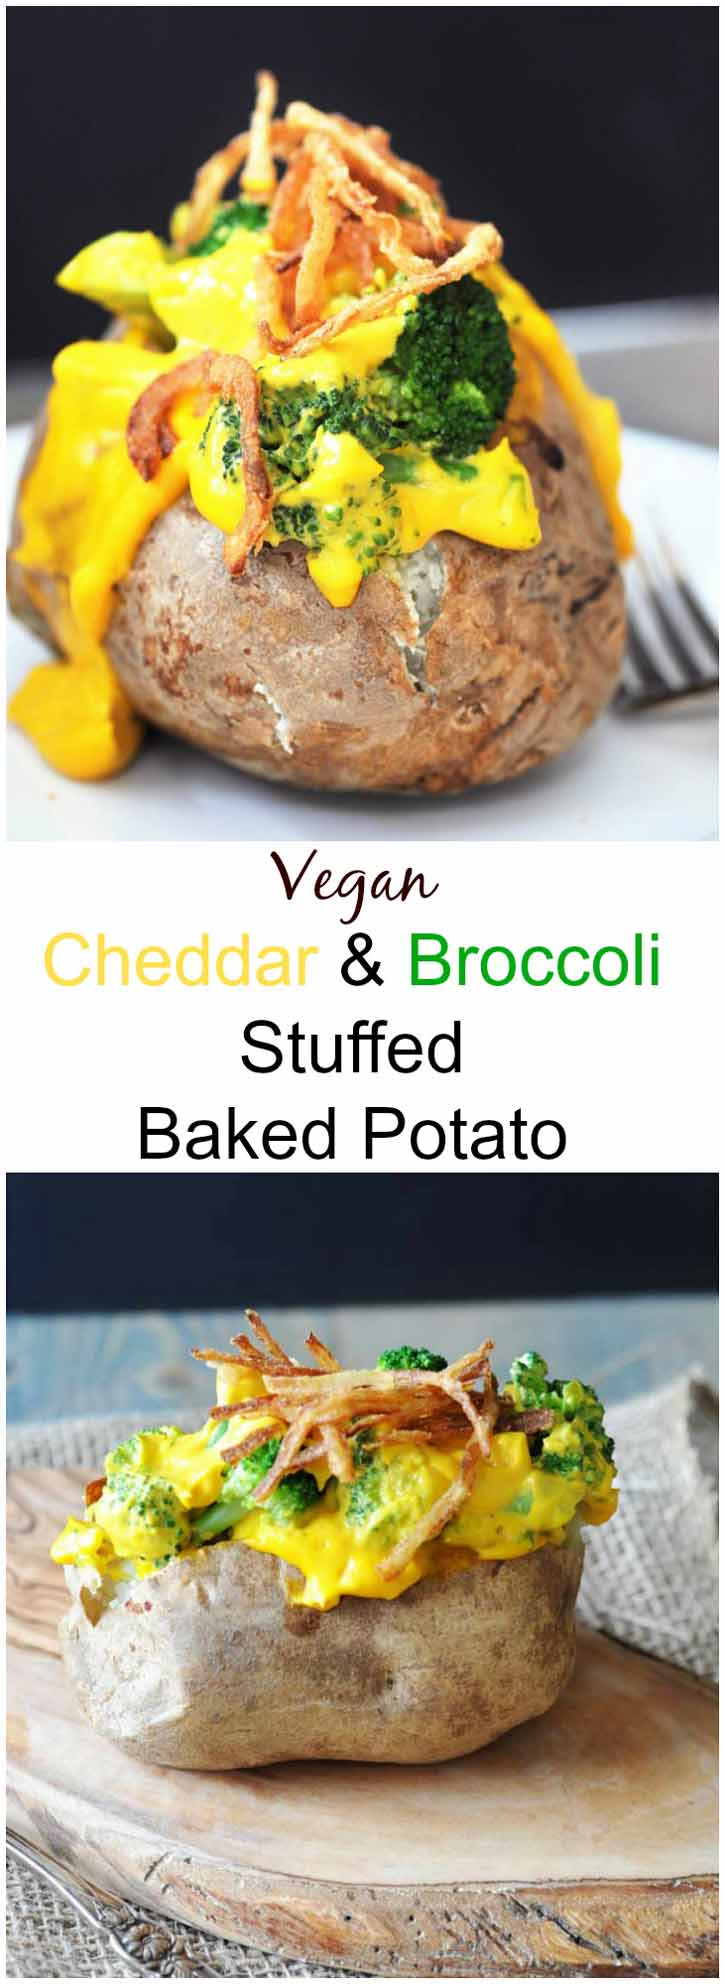 Vegan Cheddar & Broccoli Stuffed Baked Potato! Filled with our 6 Ingredient Vegan Cheddar Cheese Sauce and broccoli. The perfect easy weeknight meal. www.veganosity.com